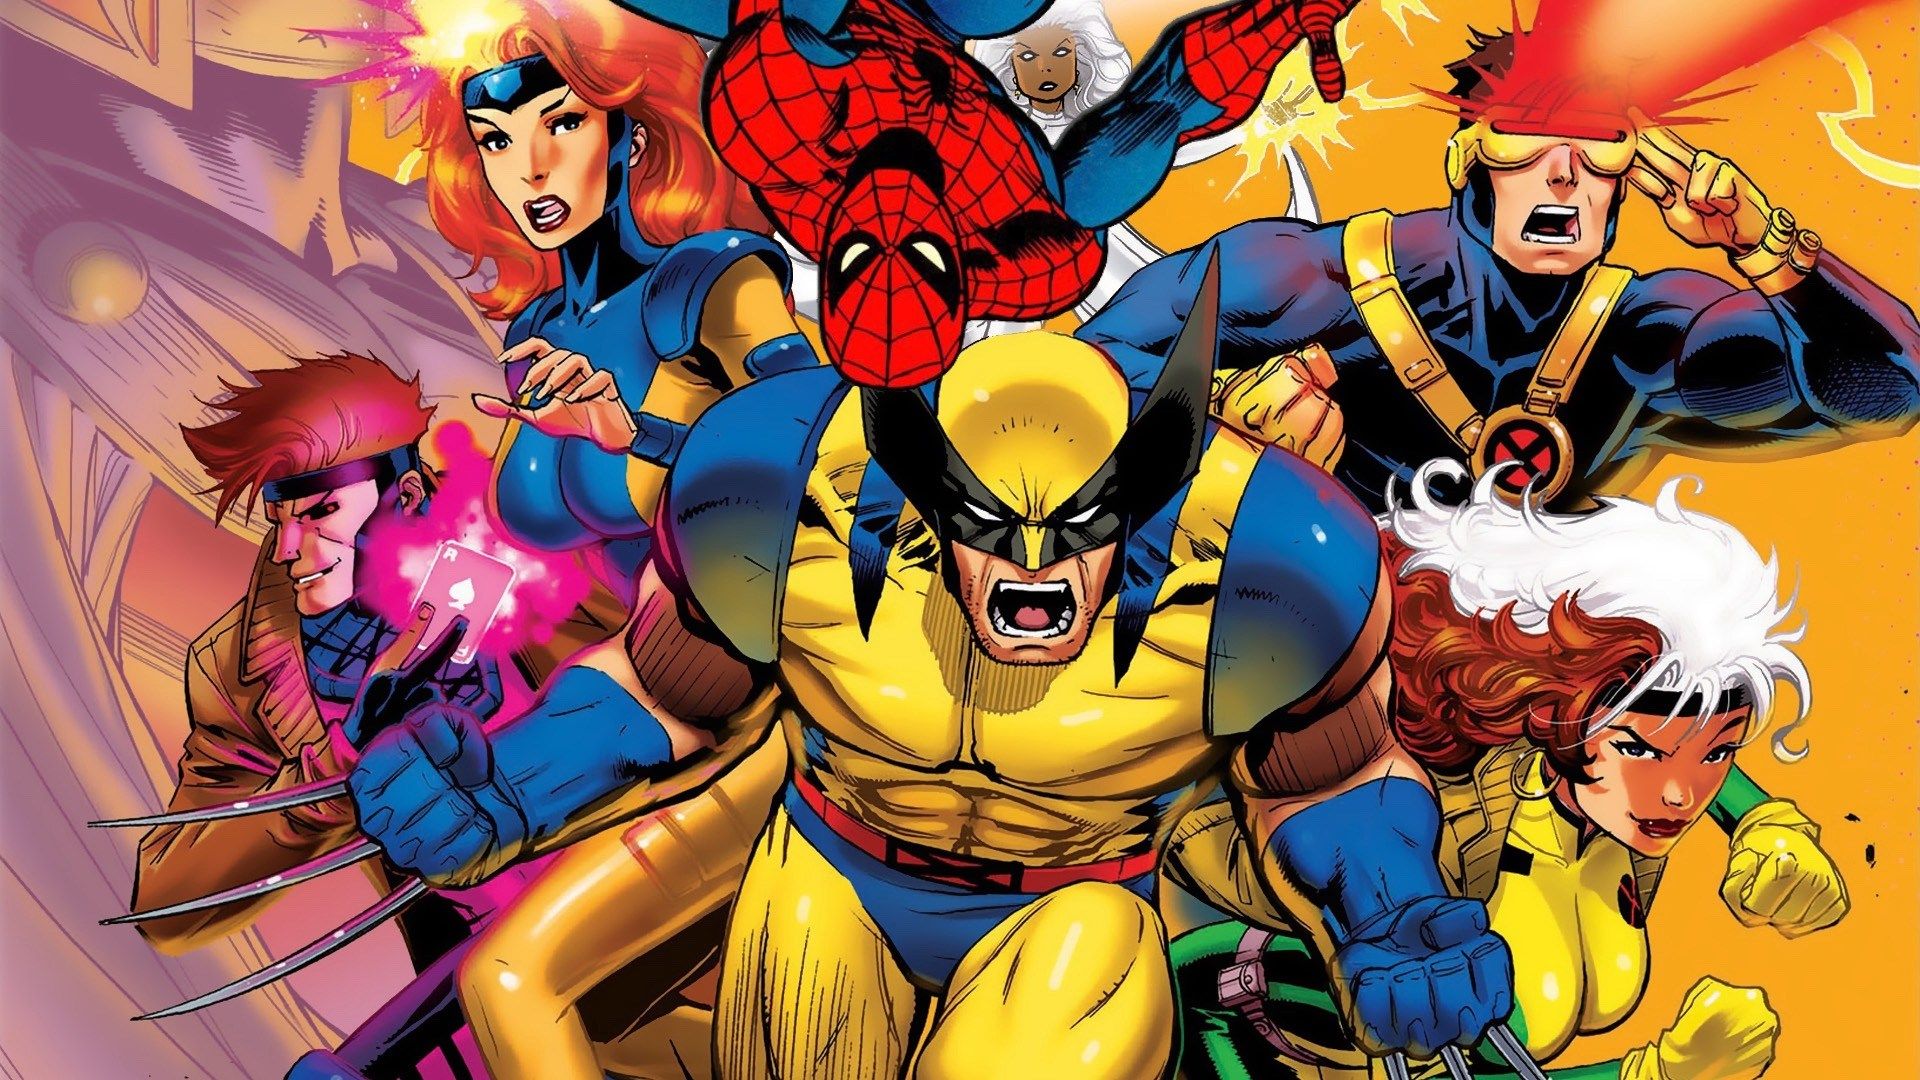 X Men: The Animated Series' And More 90's Marvel Animated Series